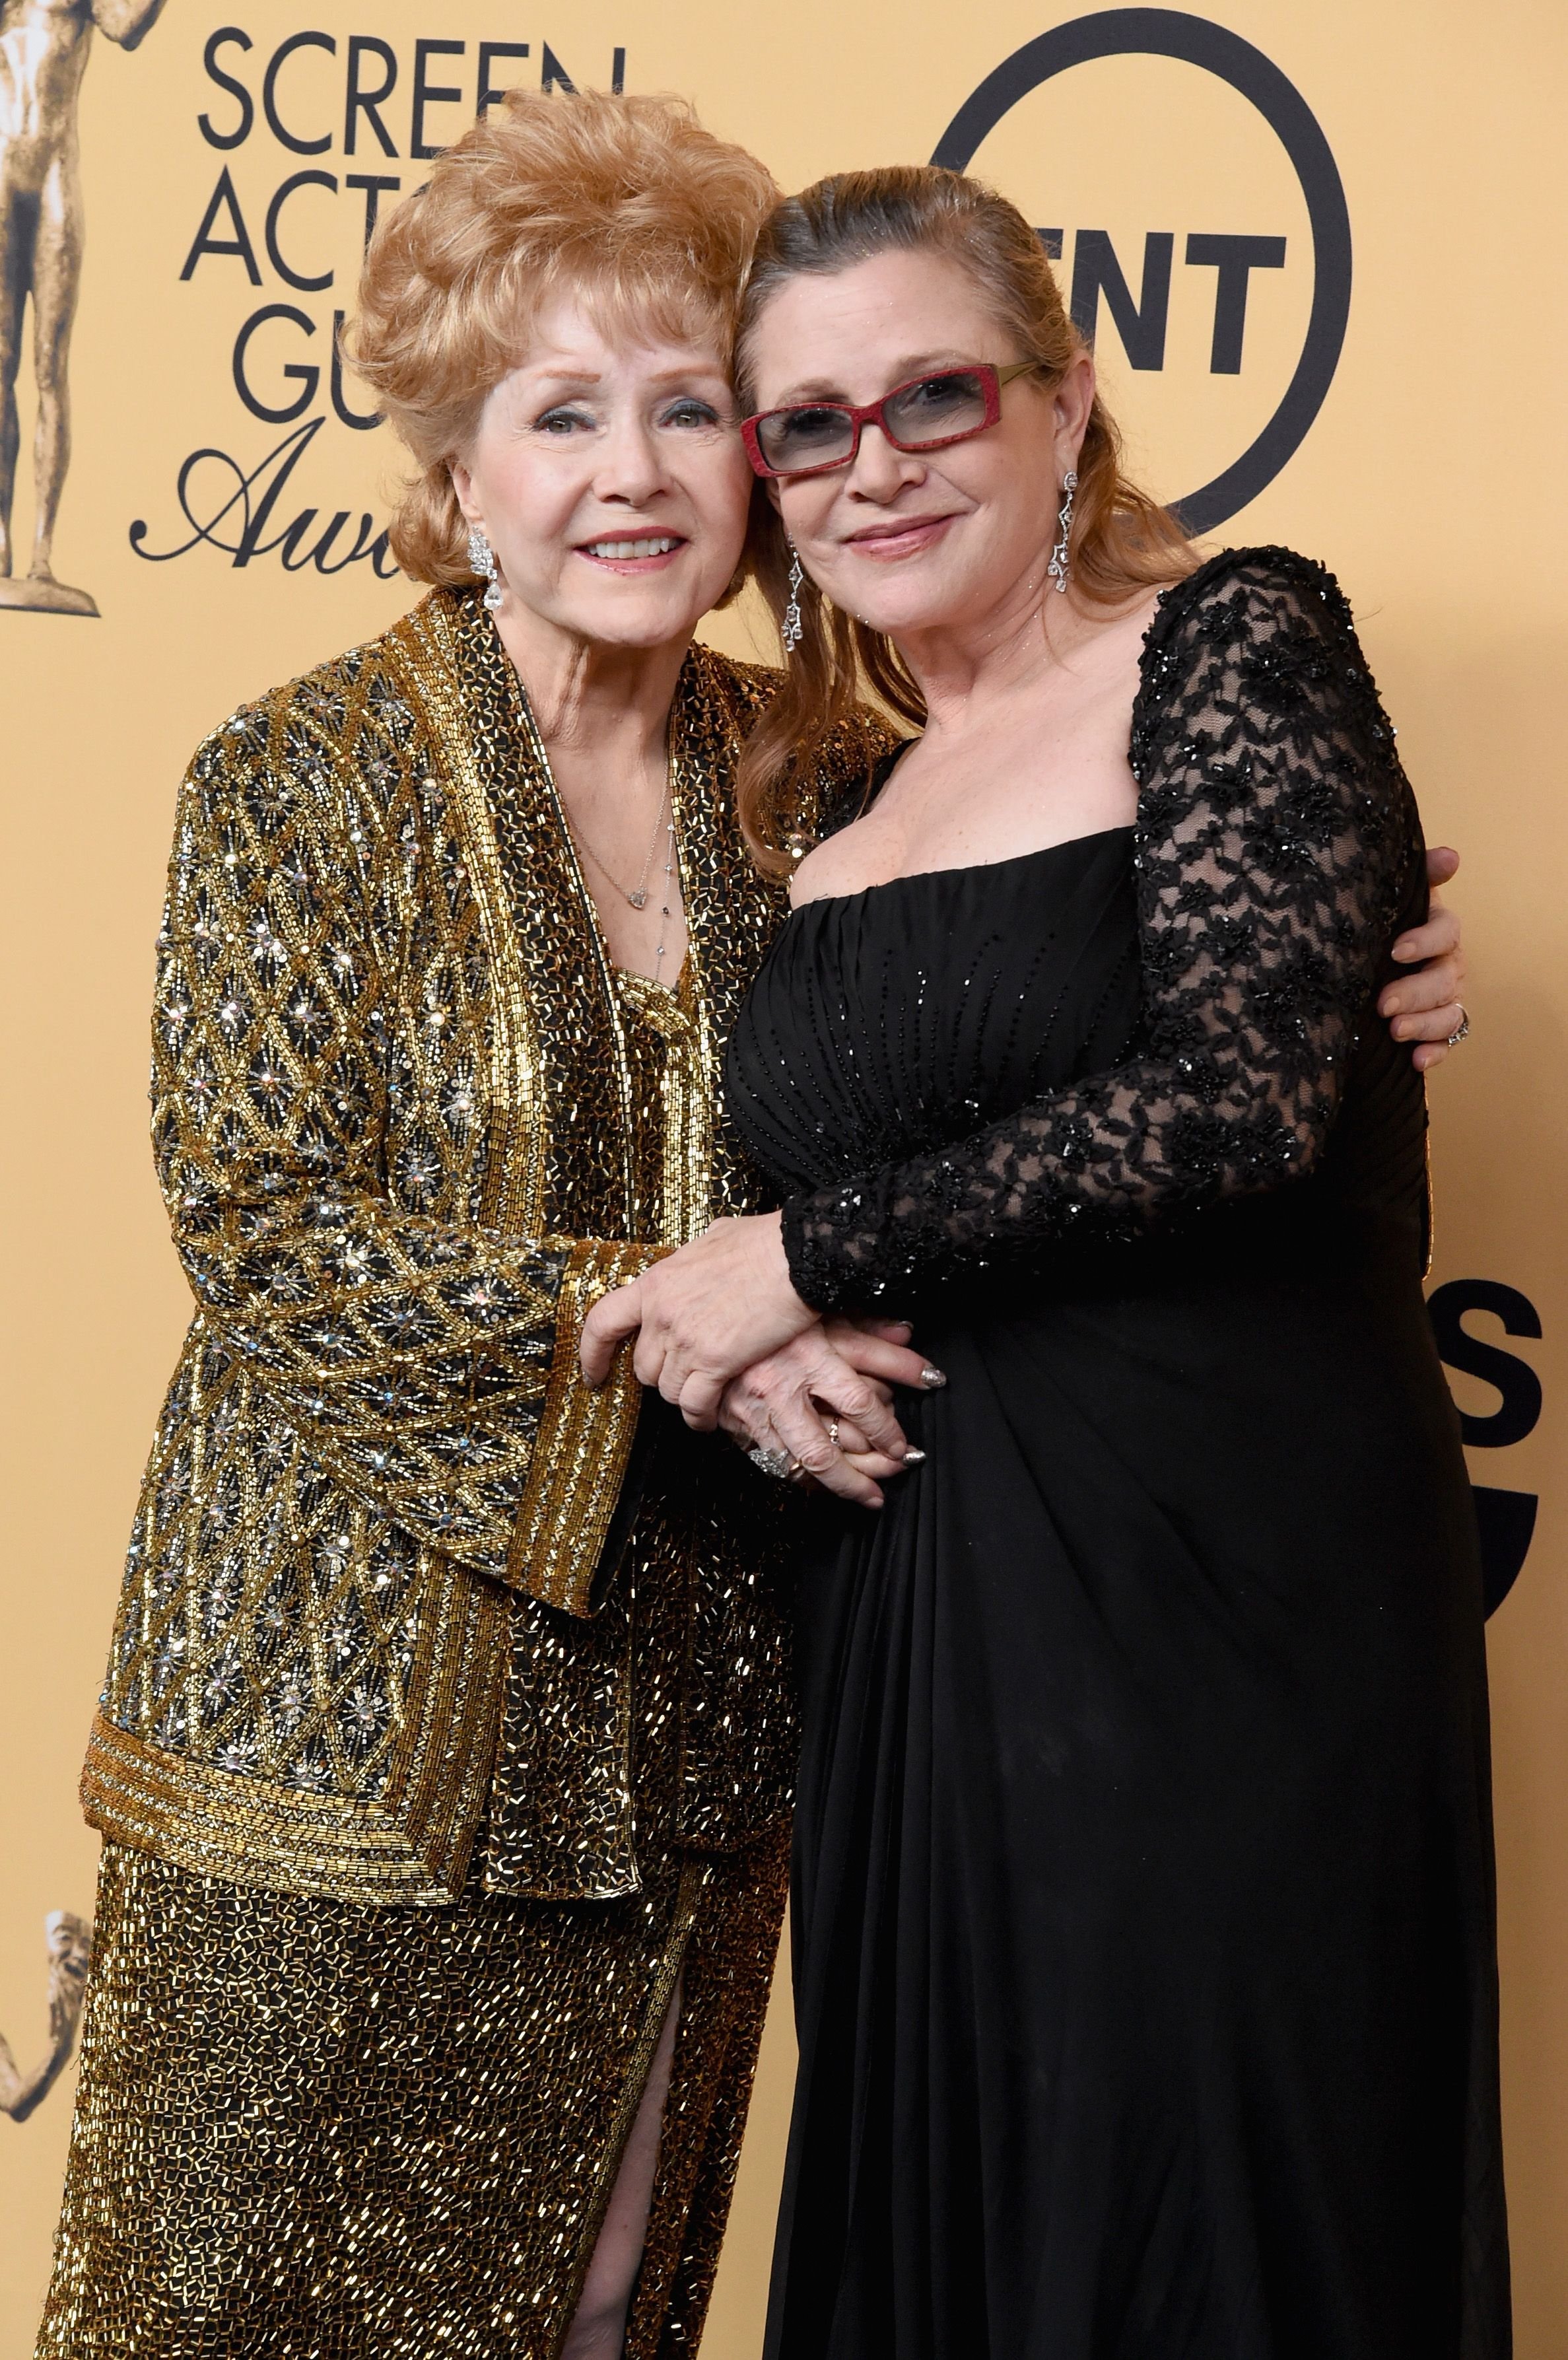 Honoree Debbie Reynolds and actress Carrie Fisher pose in the press room at the 21st Annual Screen Actors Guild Awards at The Shrine Auditorium on January 25, 2015 | Photo: Getty Images